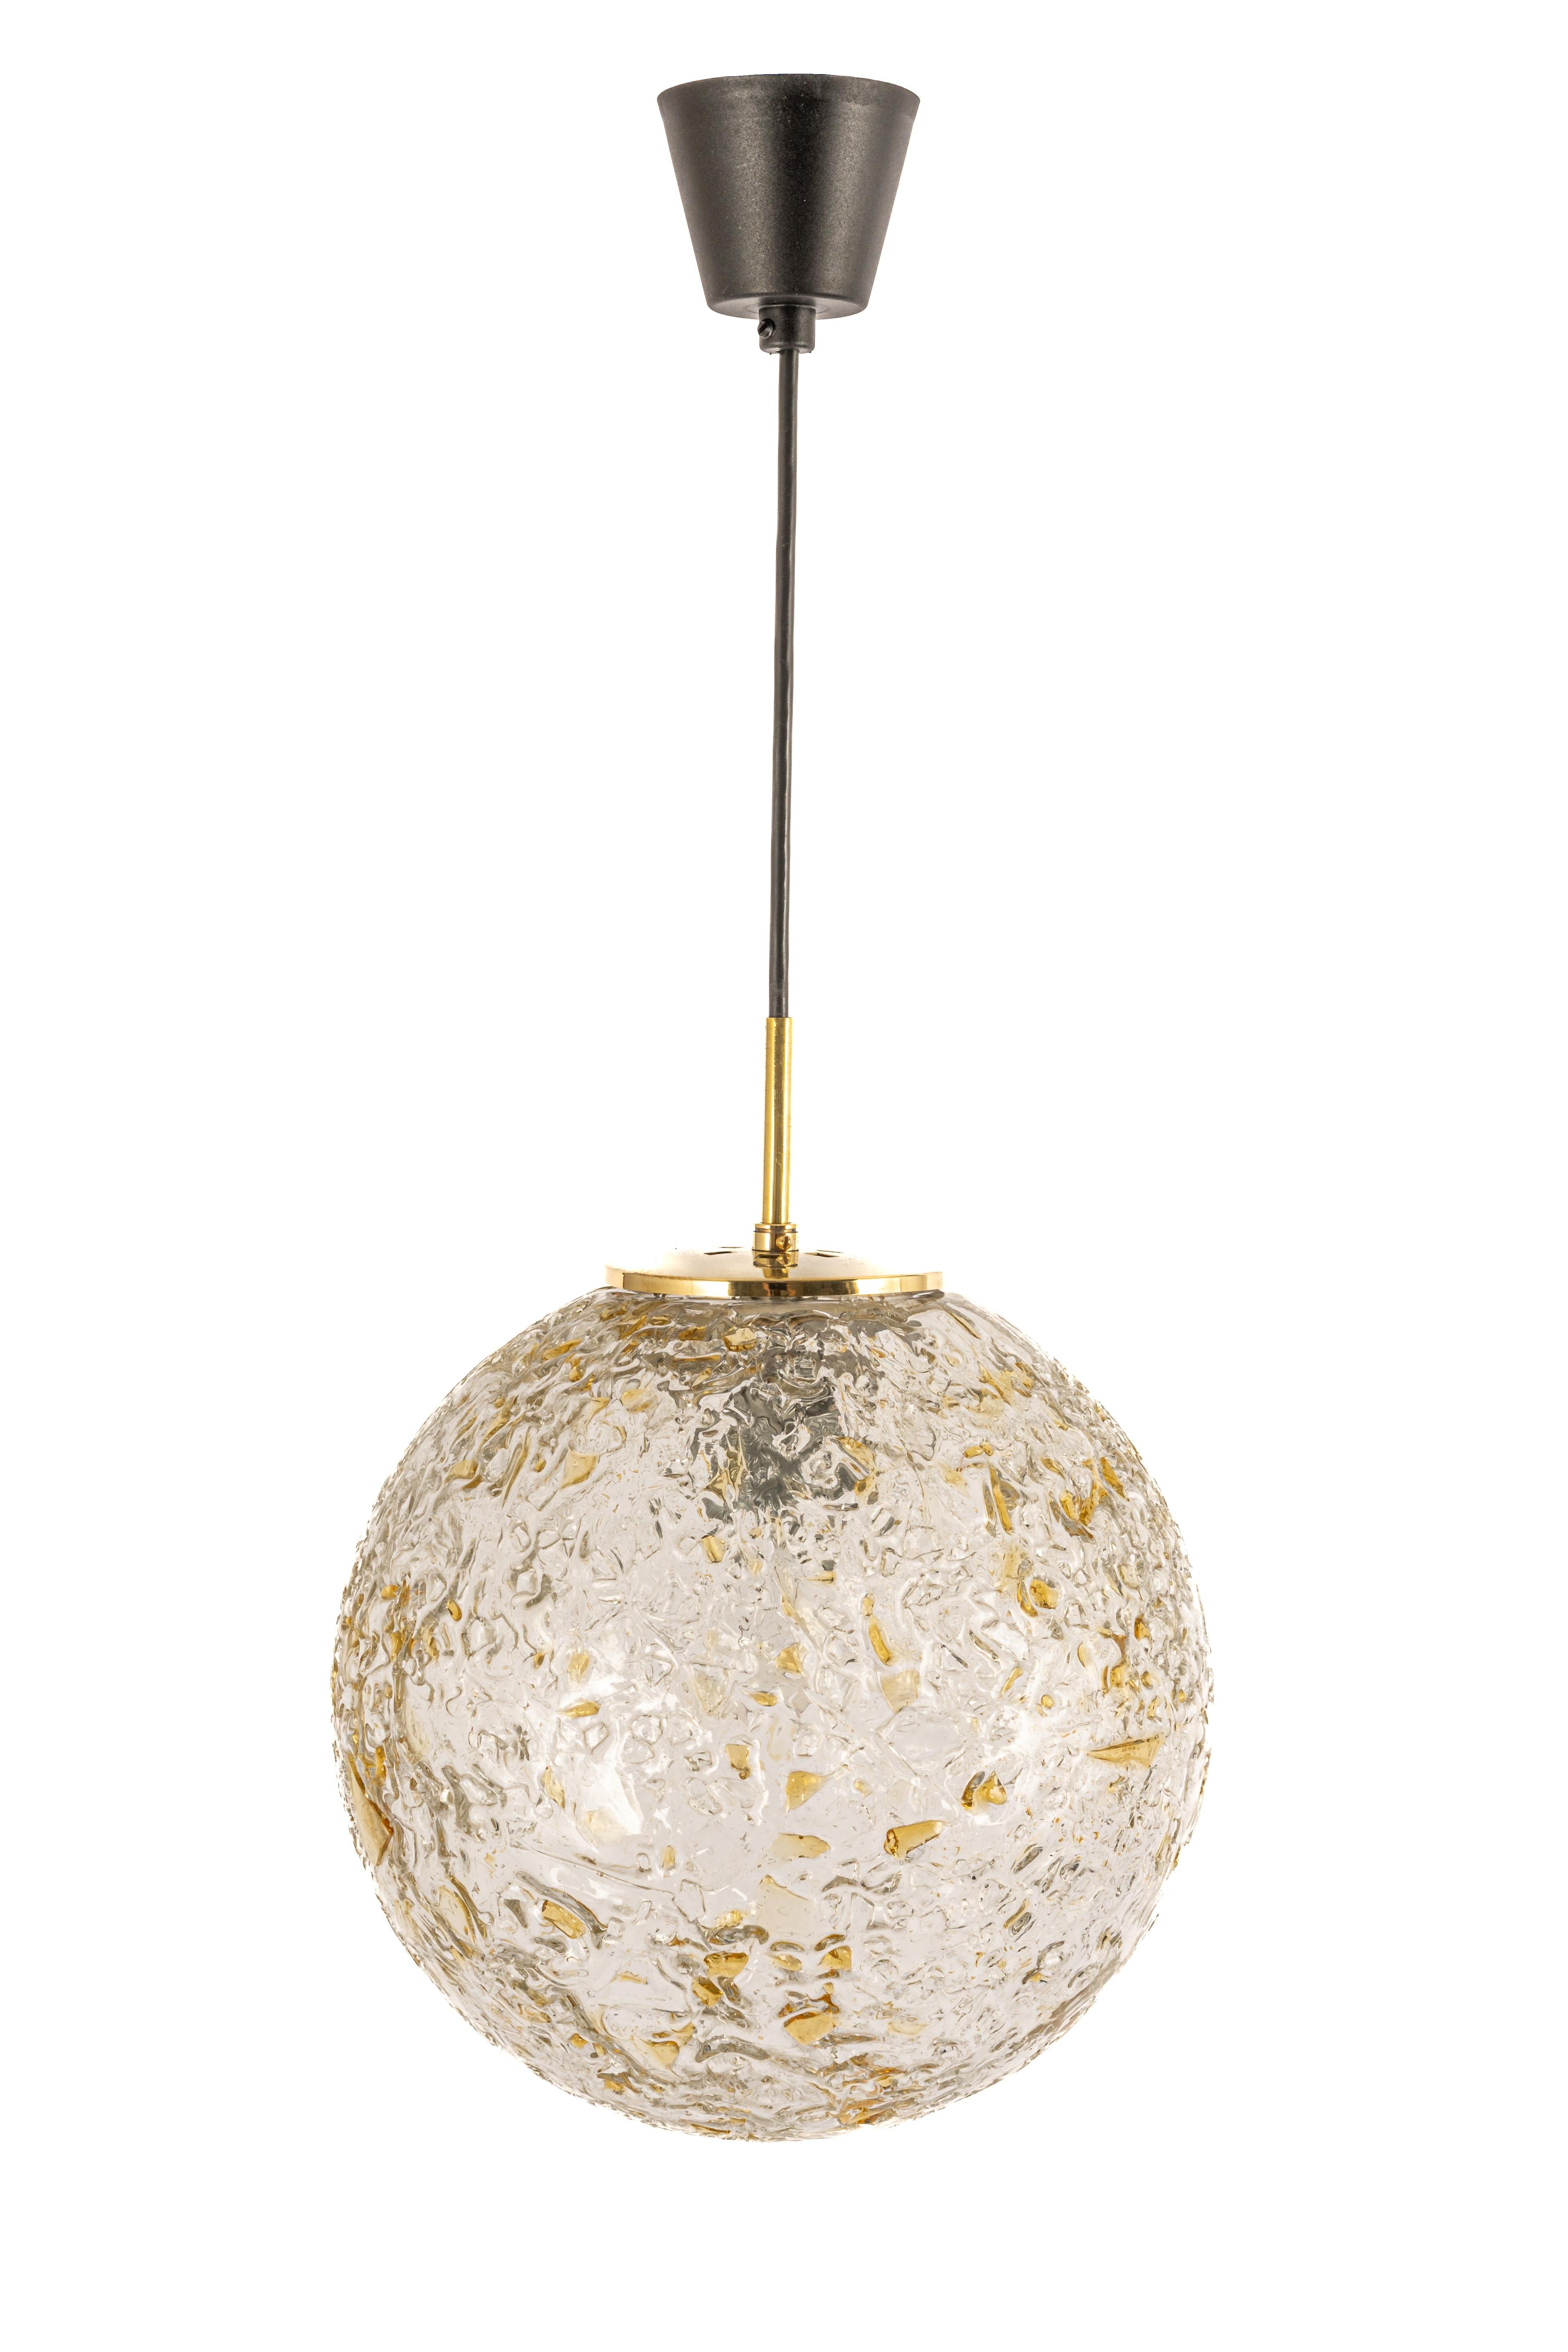 Doria pendant light with nice Murano glass ball.
High quality of materials, gives a wonderful light effect when it is on.
Very good condition. Cleaned, well-wired, and ready to use. 
The fixture requires one standard bulb (E-27)
Light bulbs are